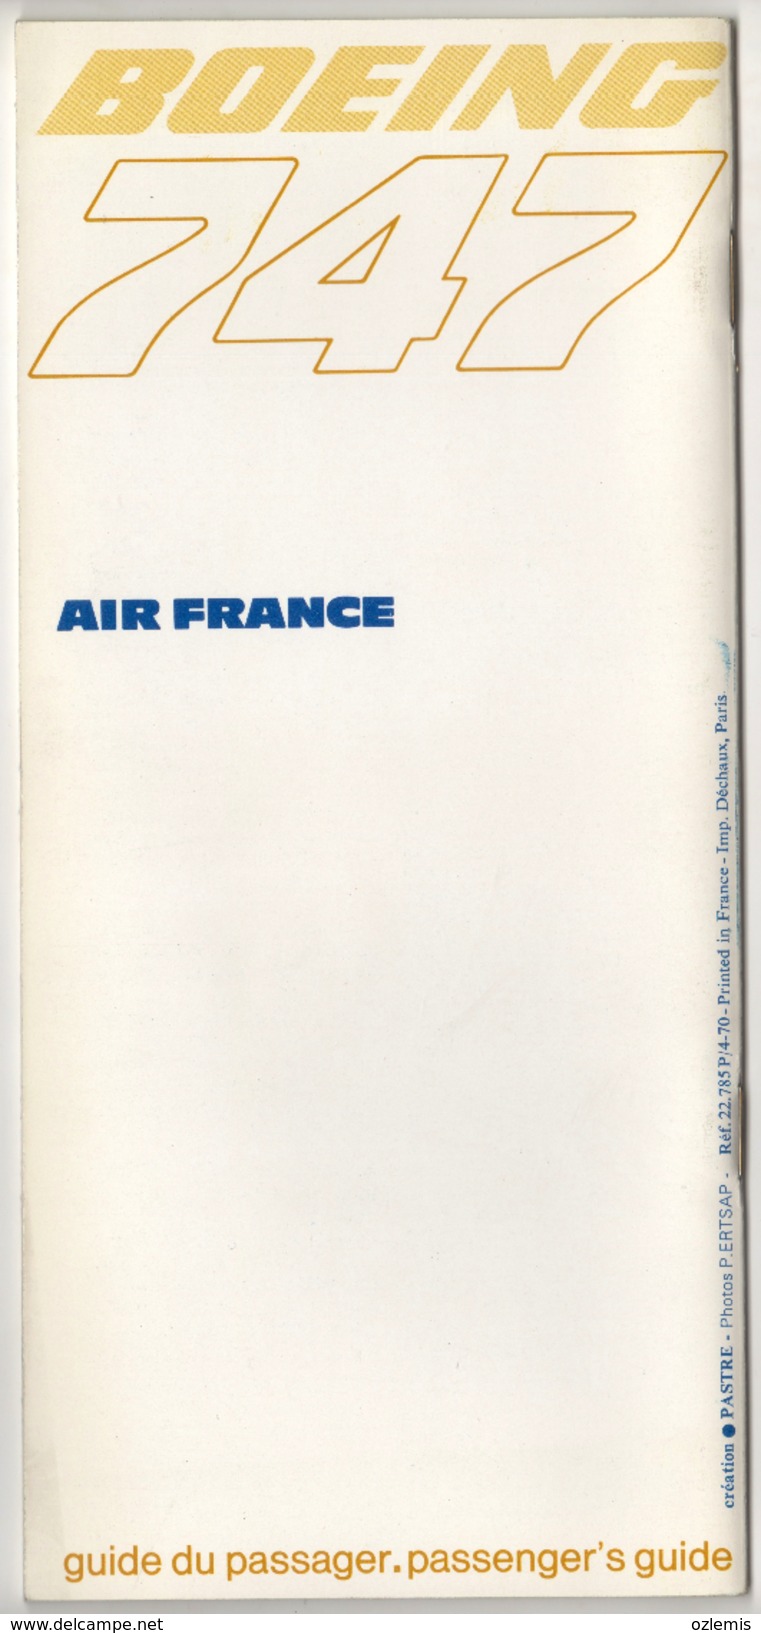 AIR FRANCE AIRLINES BOEING 747 PASSENGER'S GUIDE 27 PAGES - Advertenties